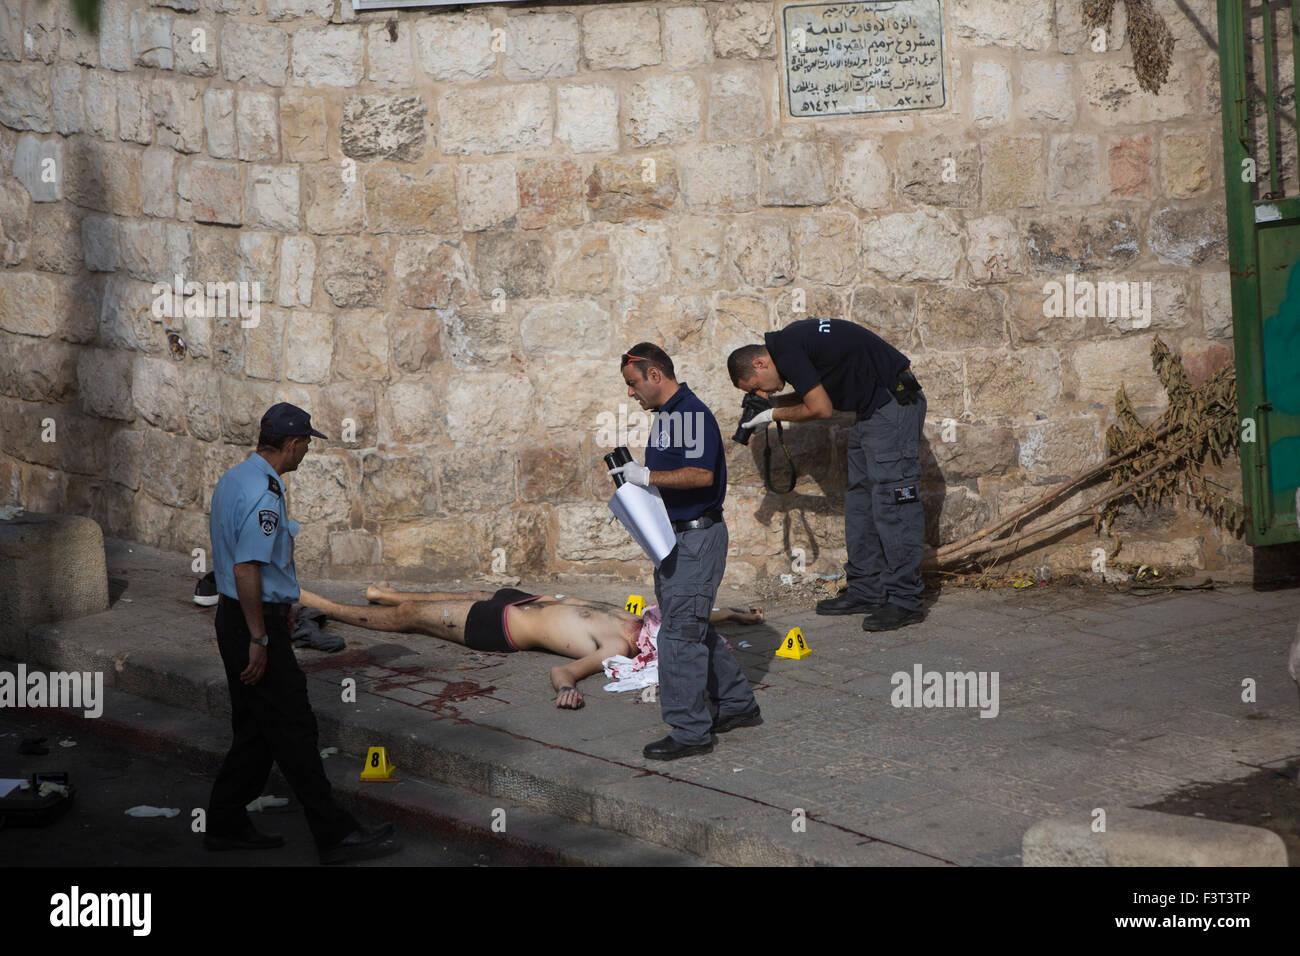 Jerusalem, Israel. 12th October, 2015. Israeli police inspect the body of a Palestinian man who was shot and killed by Israeli police near the Lion Gate in the Old City of Jerusalem, on Oct. 12, 2015. Police shot and killed a Palestinian who allegedly tried to stab them in Jerusalem on Monday, authorities said. According to an initial investigation, a Palestinian man raised the suspicion of police officers at the scene as he walked down the street, police spokesperson Micky Rosenfeld told Xinhua. Credit:  Xinhua/Alamy Live News Stock Photo